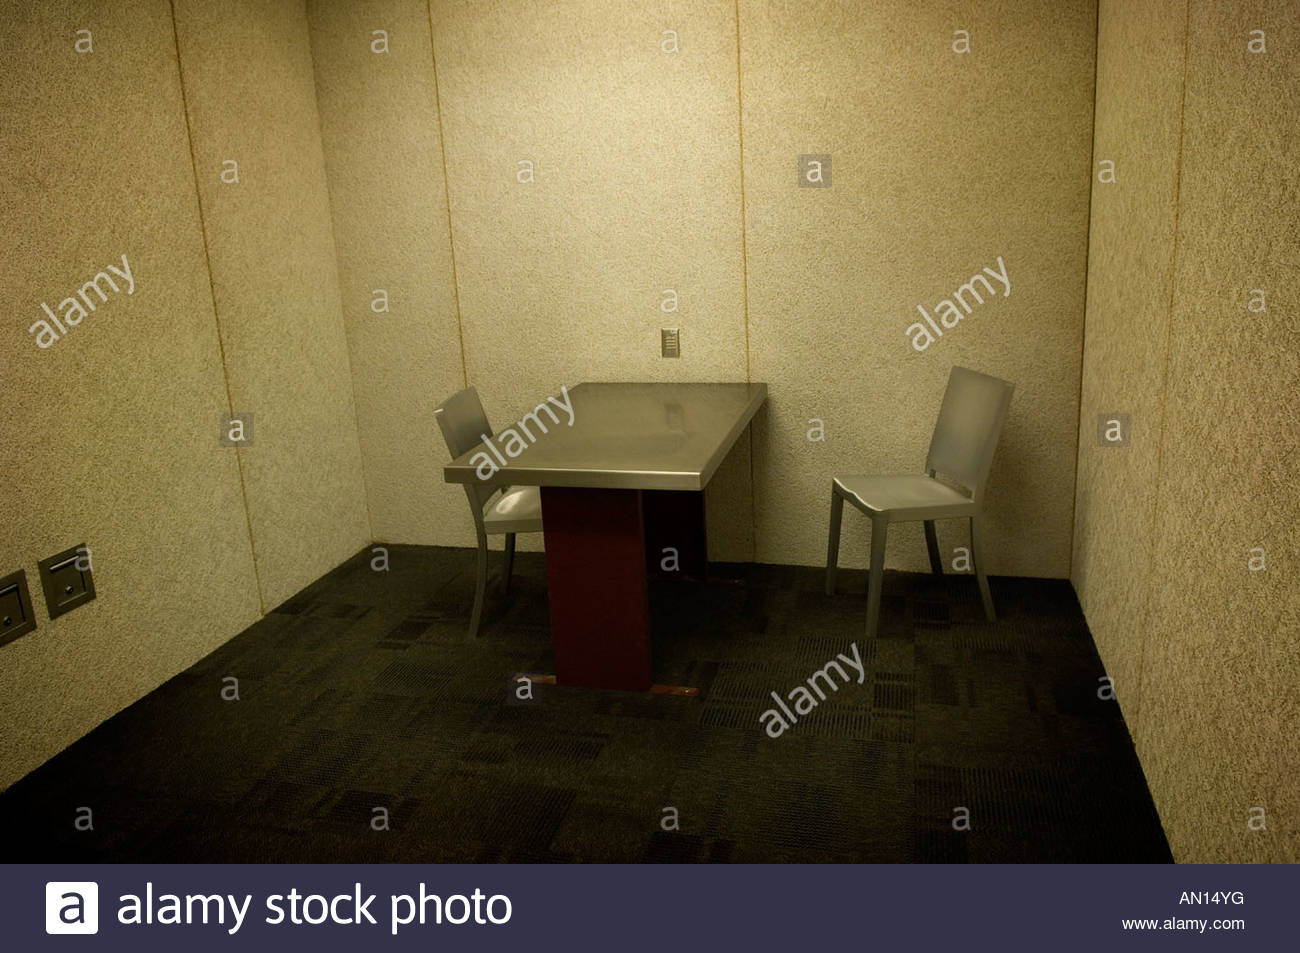 Dingy Looking New Police Interrogation Room Interview Cell